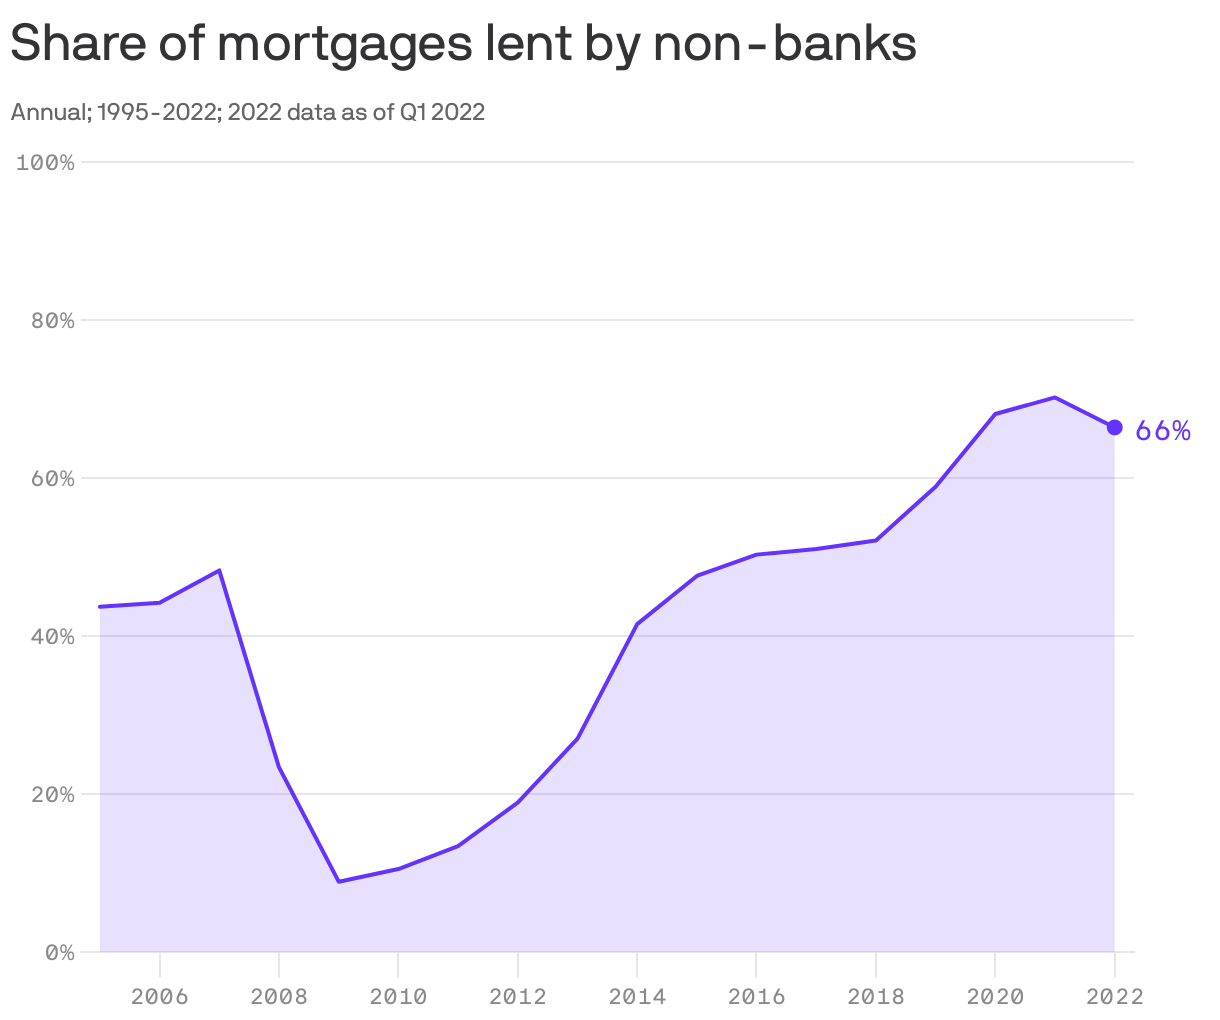 Share of mortgages lent by non-banks